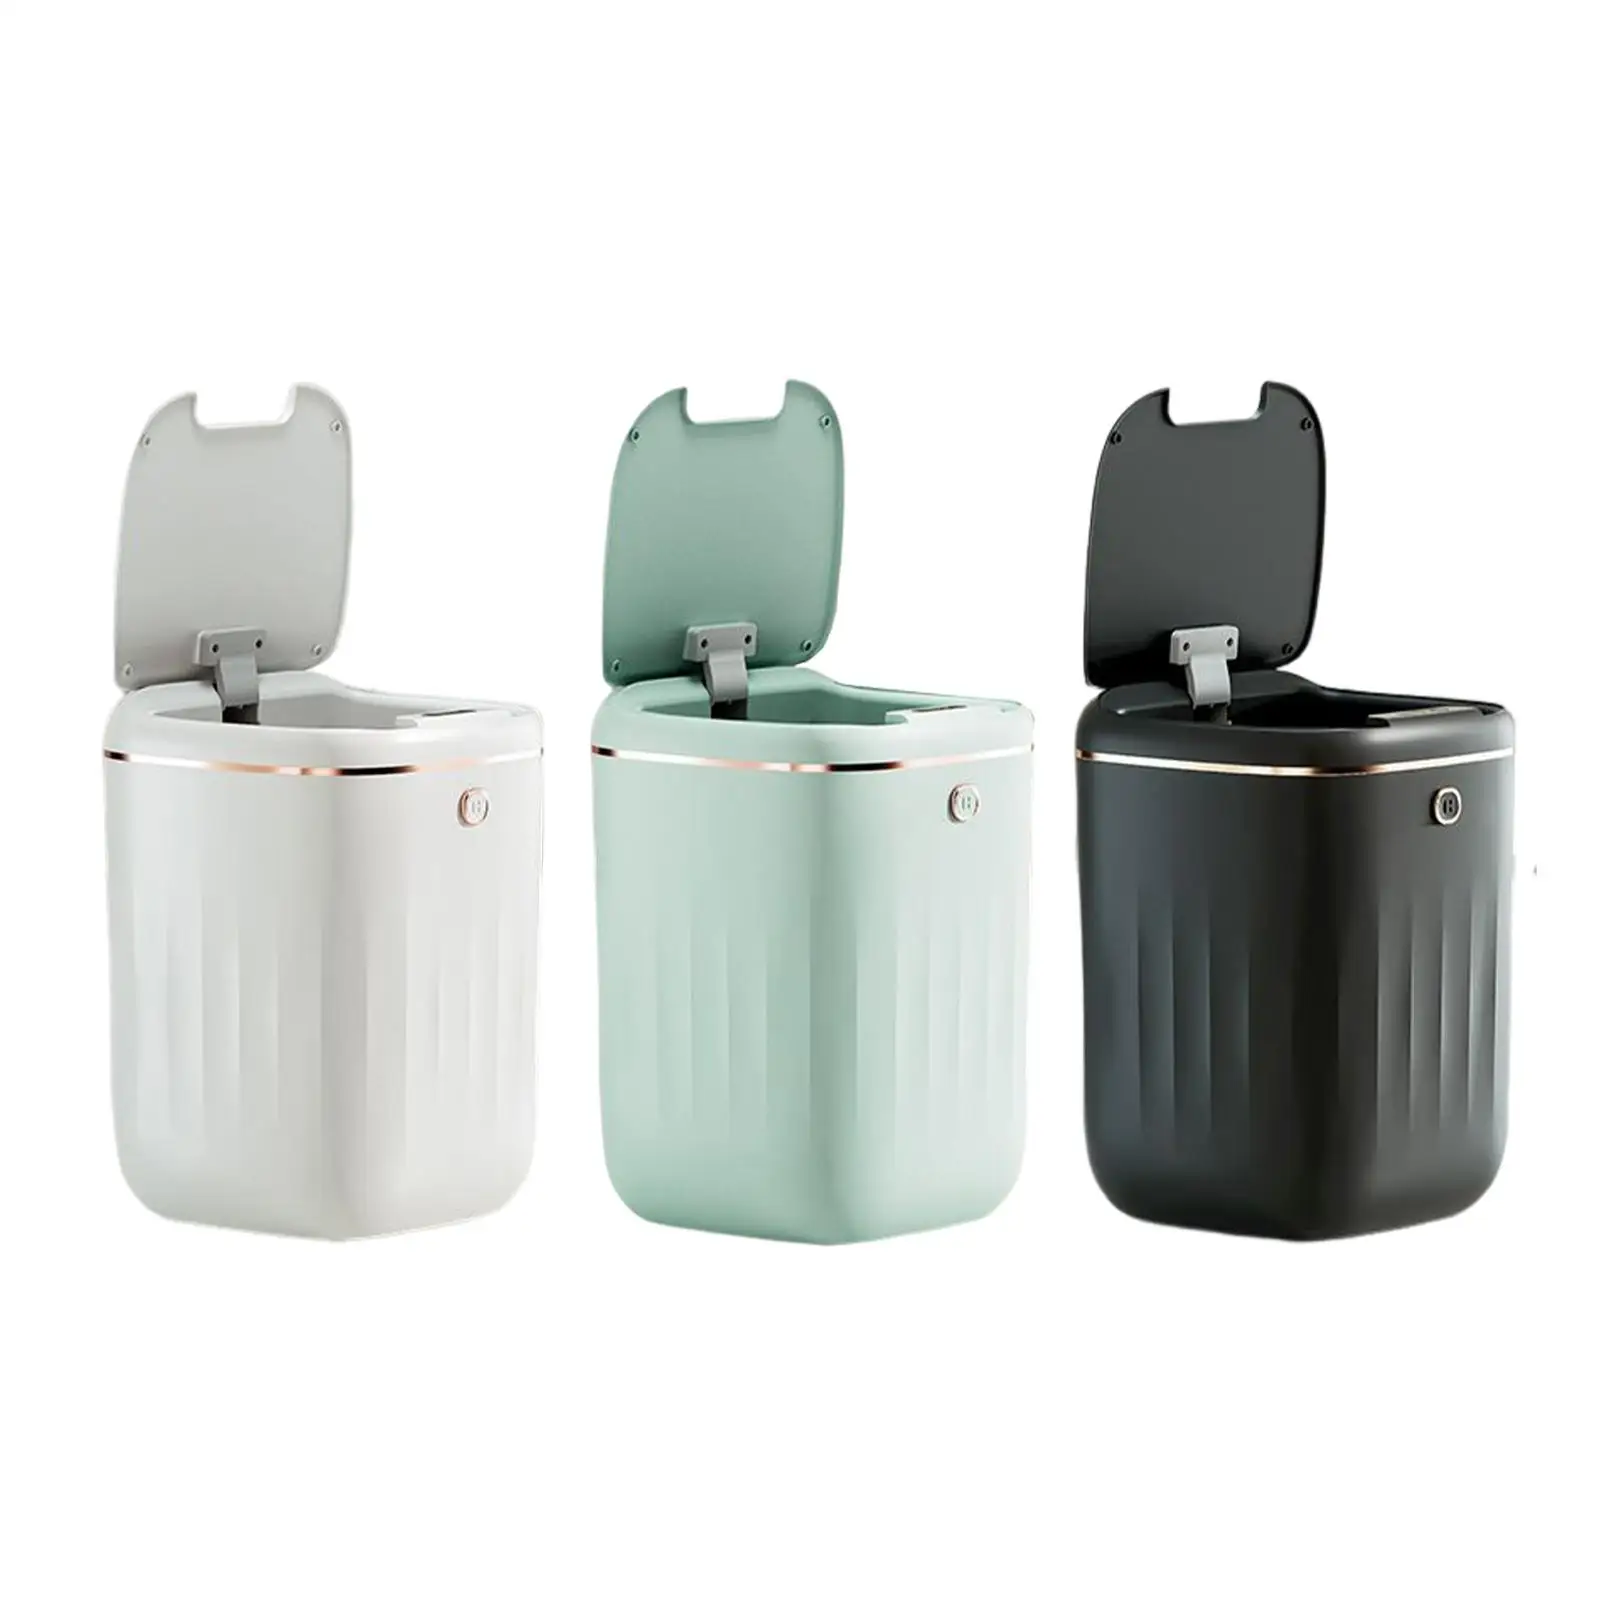 Induction Trash Bin 20L 3 Modes Automatic Large Capacity with Lid Waste Bin Dustbin for Playroom Hotel Bathroom Study Dormitory